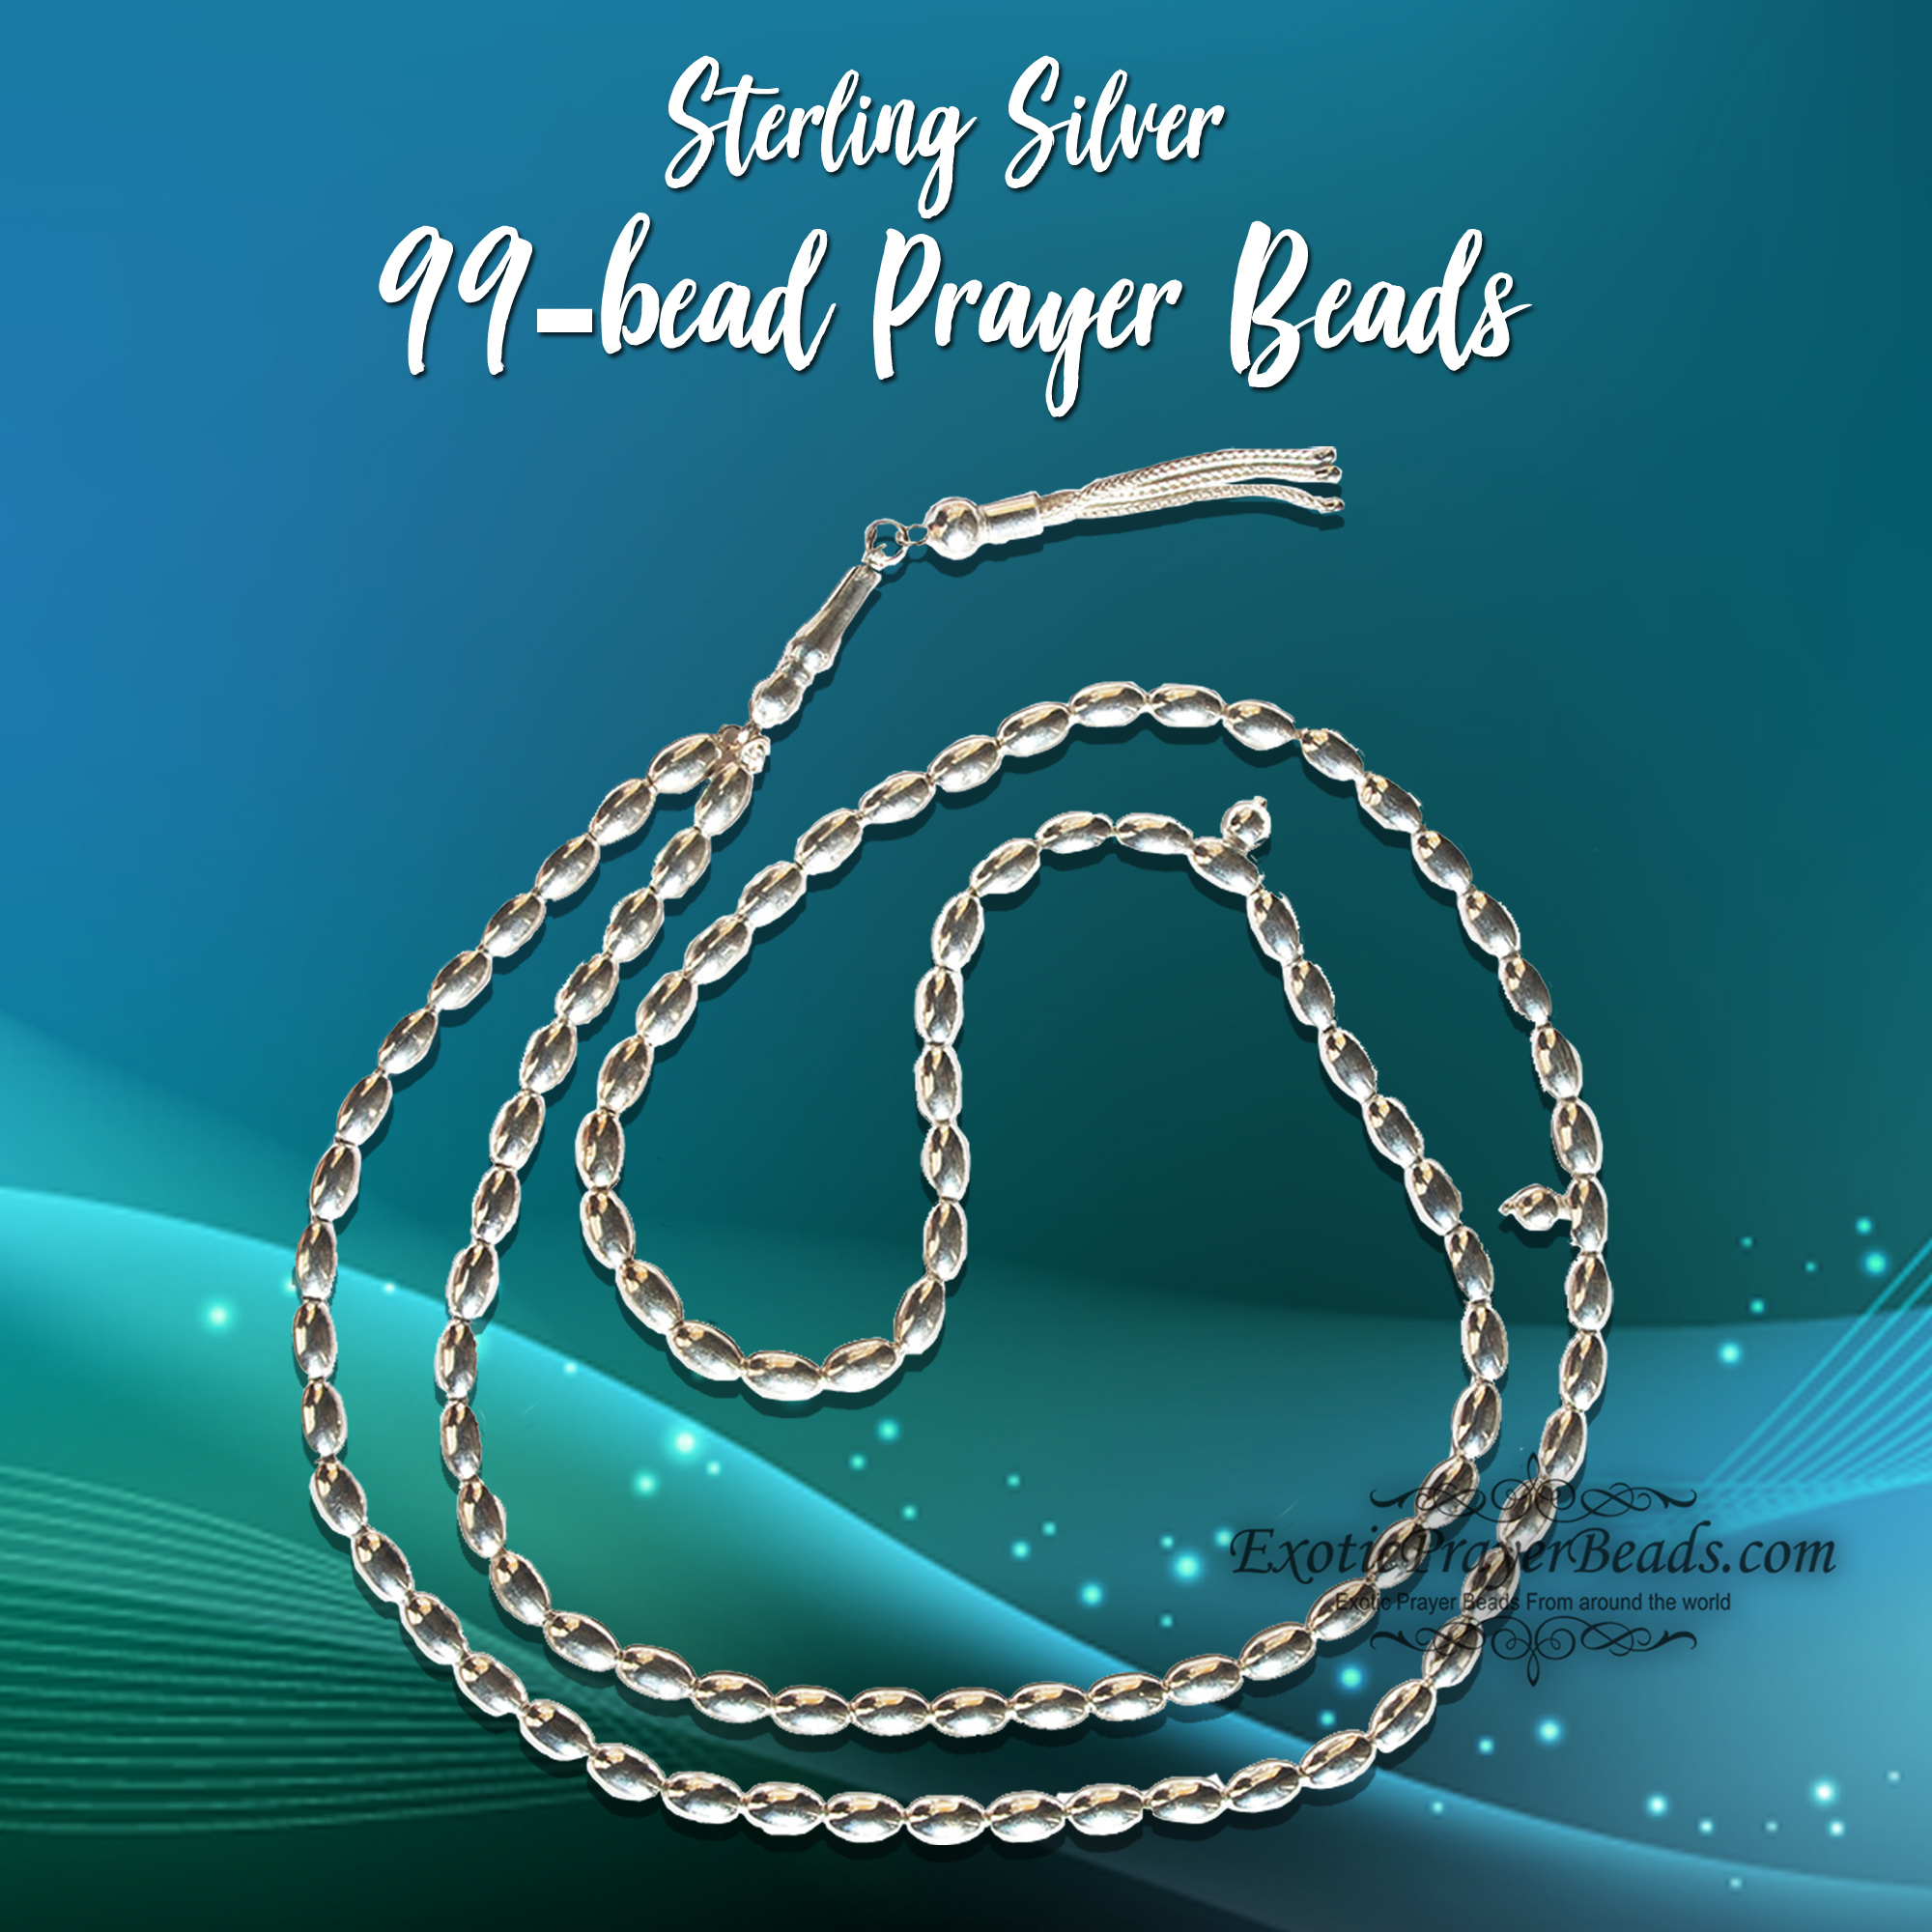 Sterling Silver 99-bead Prayer Beads with Oval Beads